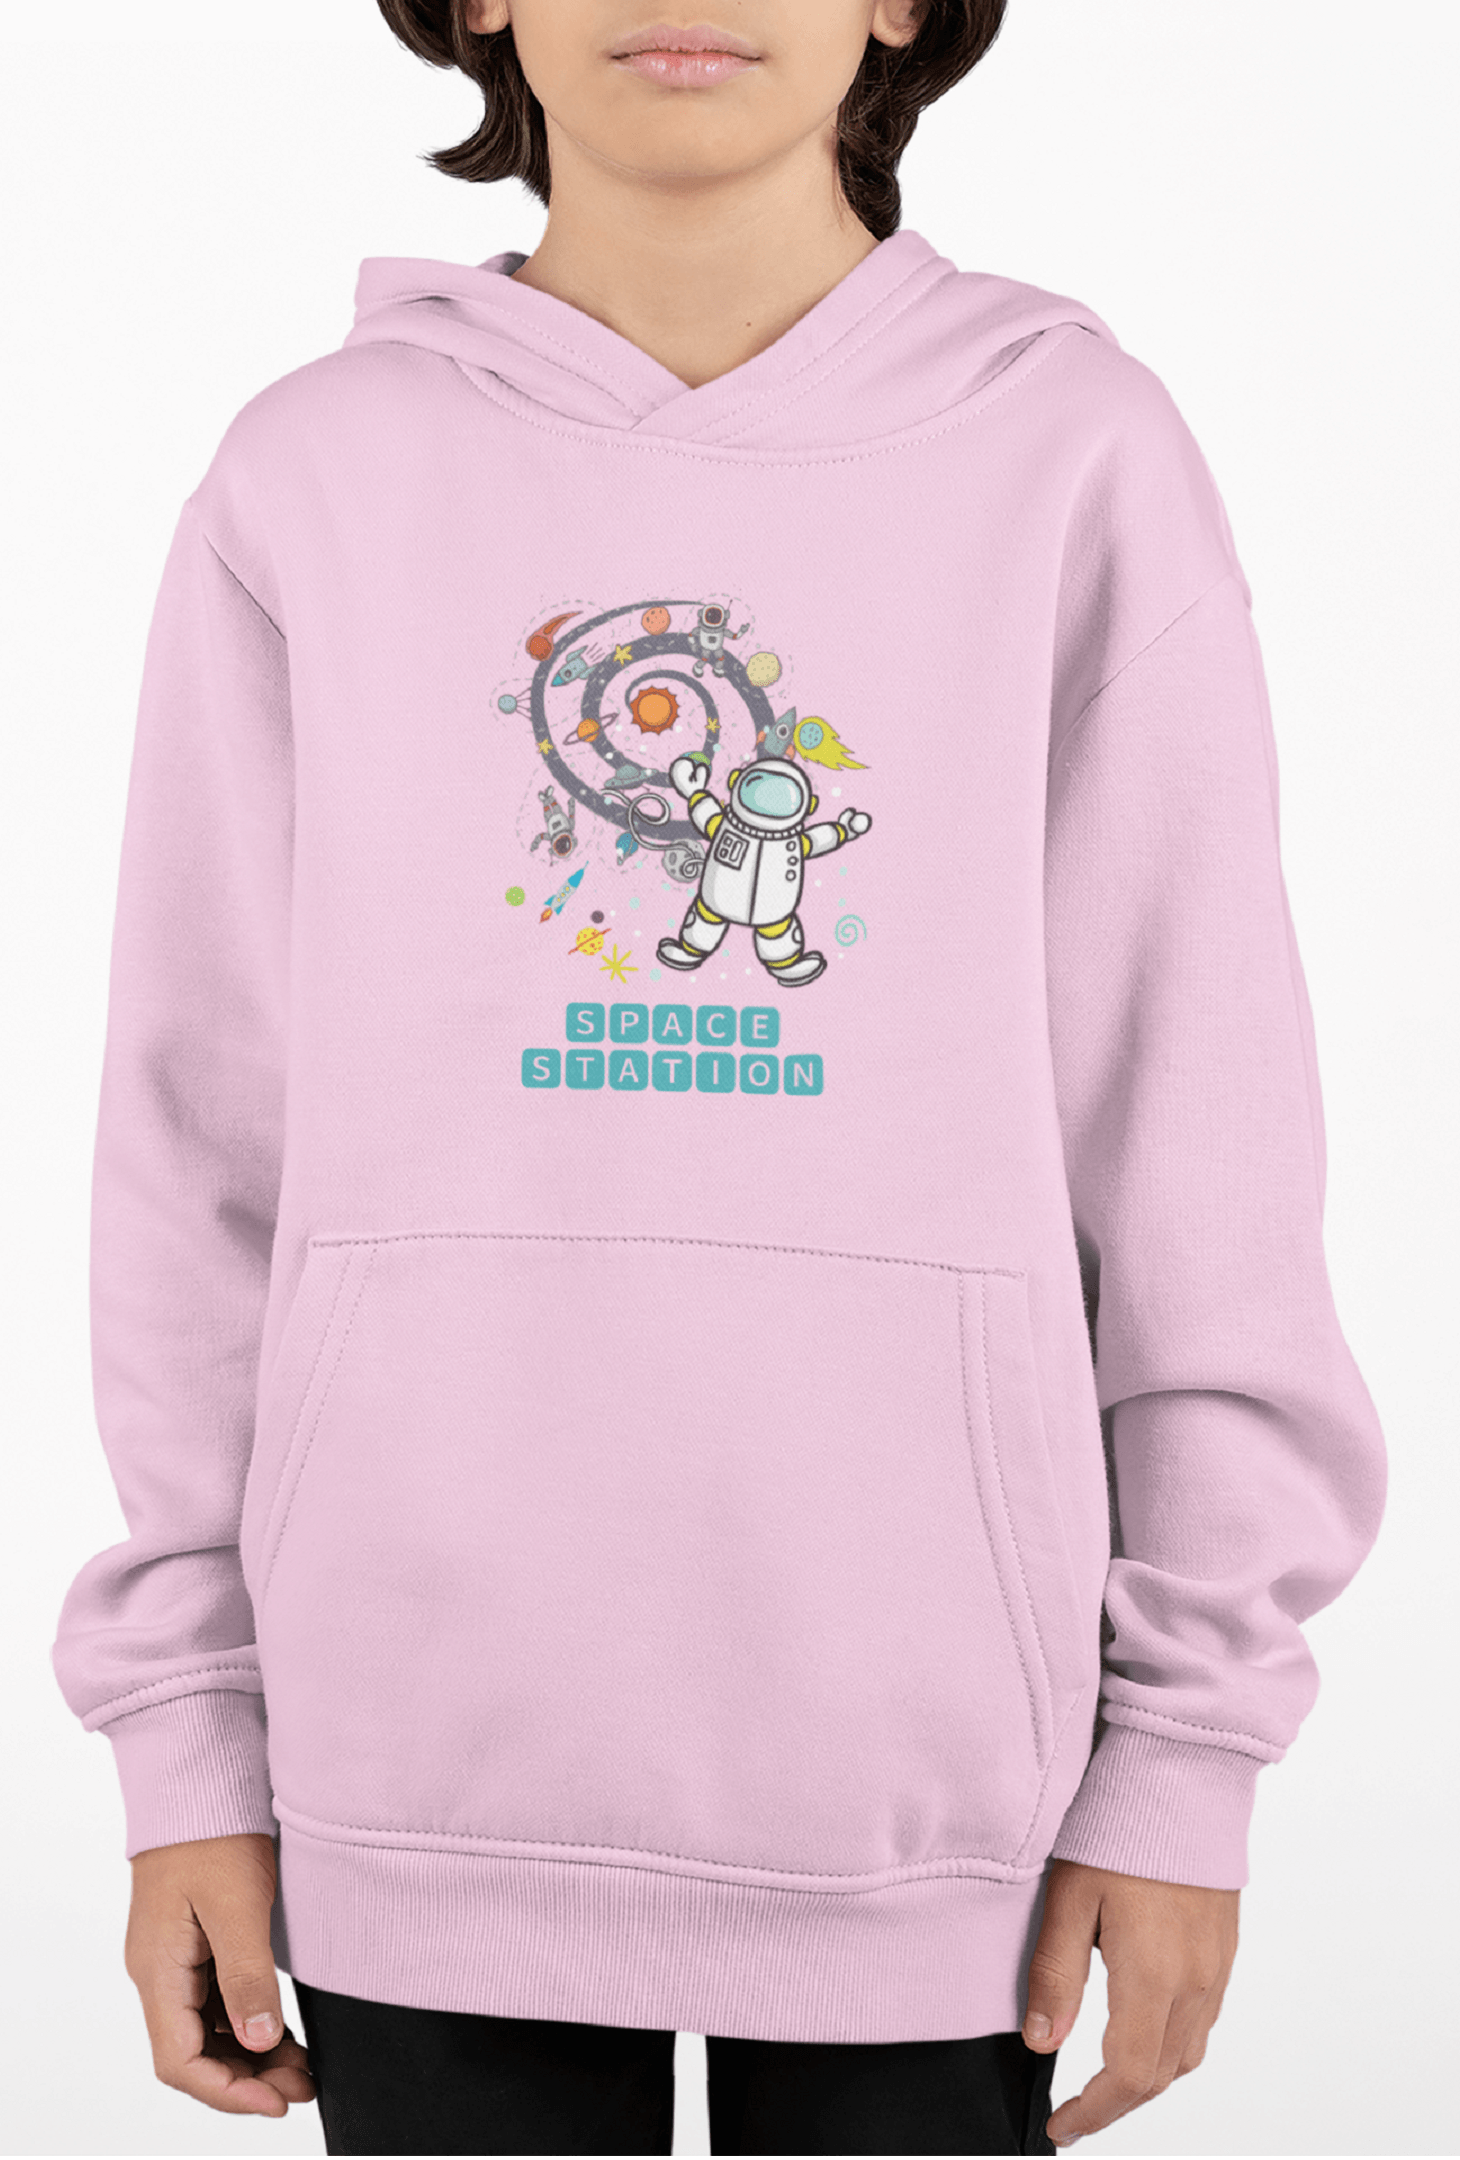 Light Pink Hoodie for Kids with Astronaut Space Design